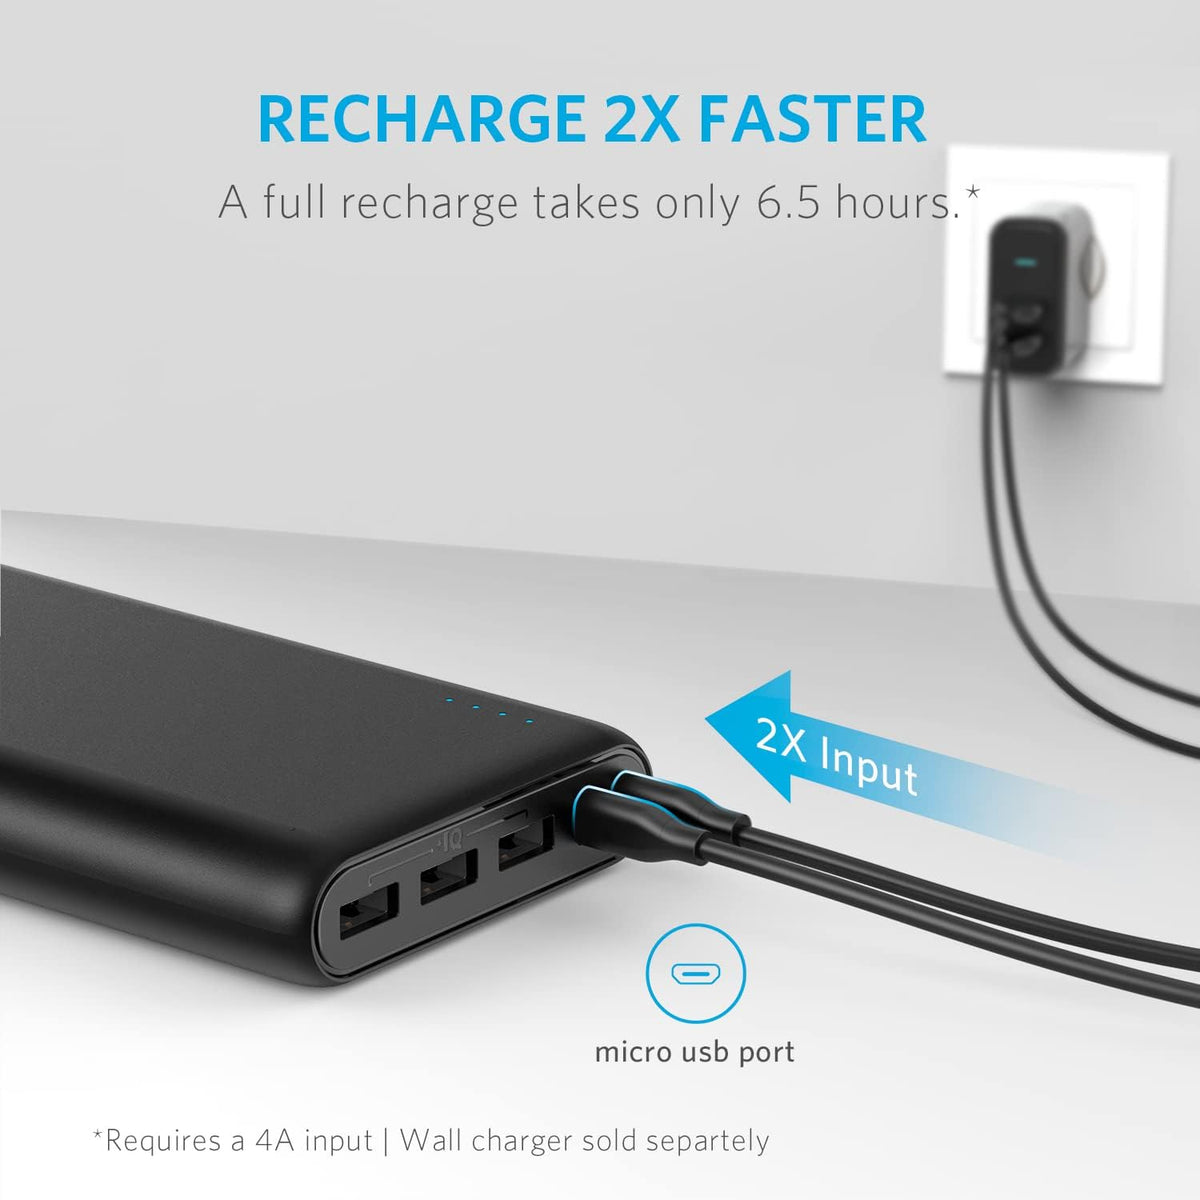 Anker 337 Power Bank (PowerCore 26K) Portable Charger, 26800mAh External Battery with Dual Input Port and Double-Speed Recharging